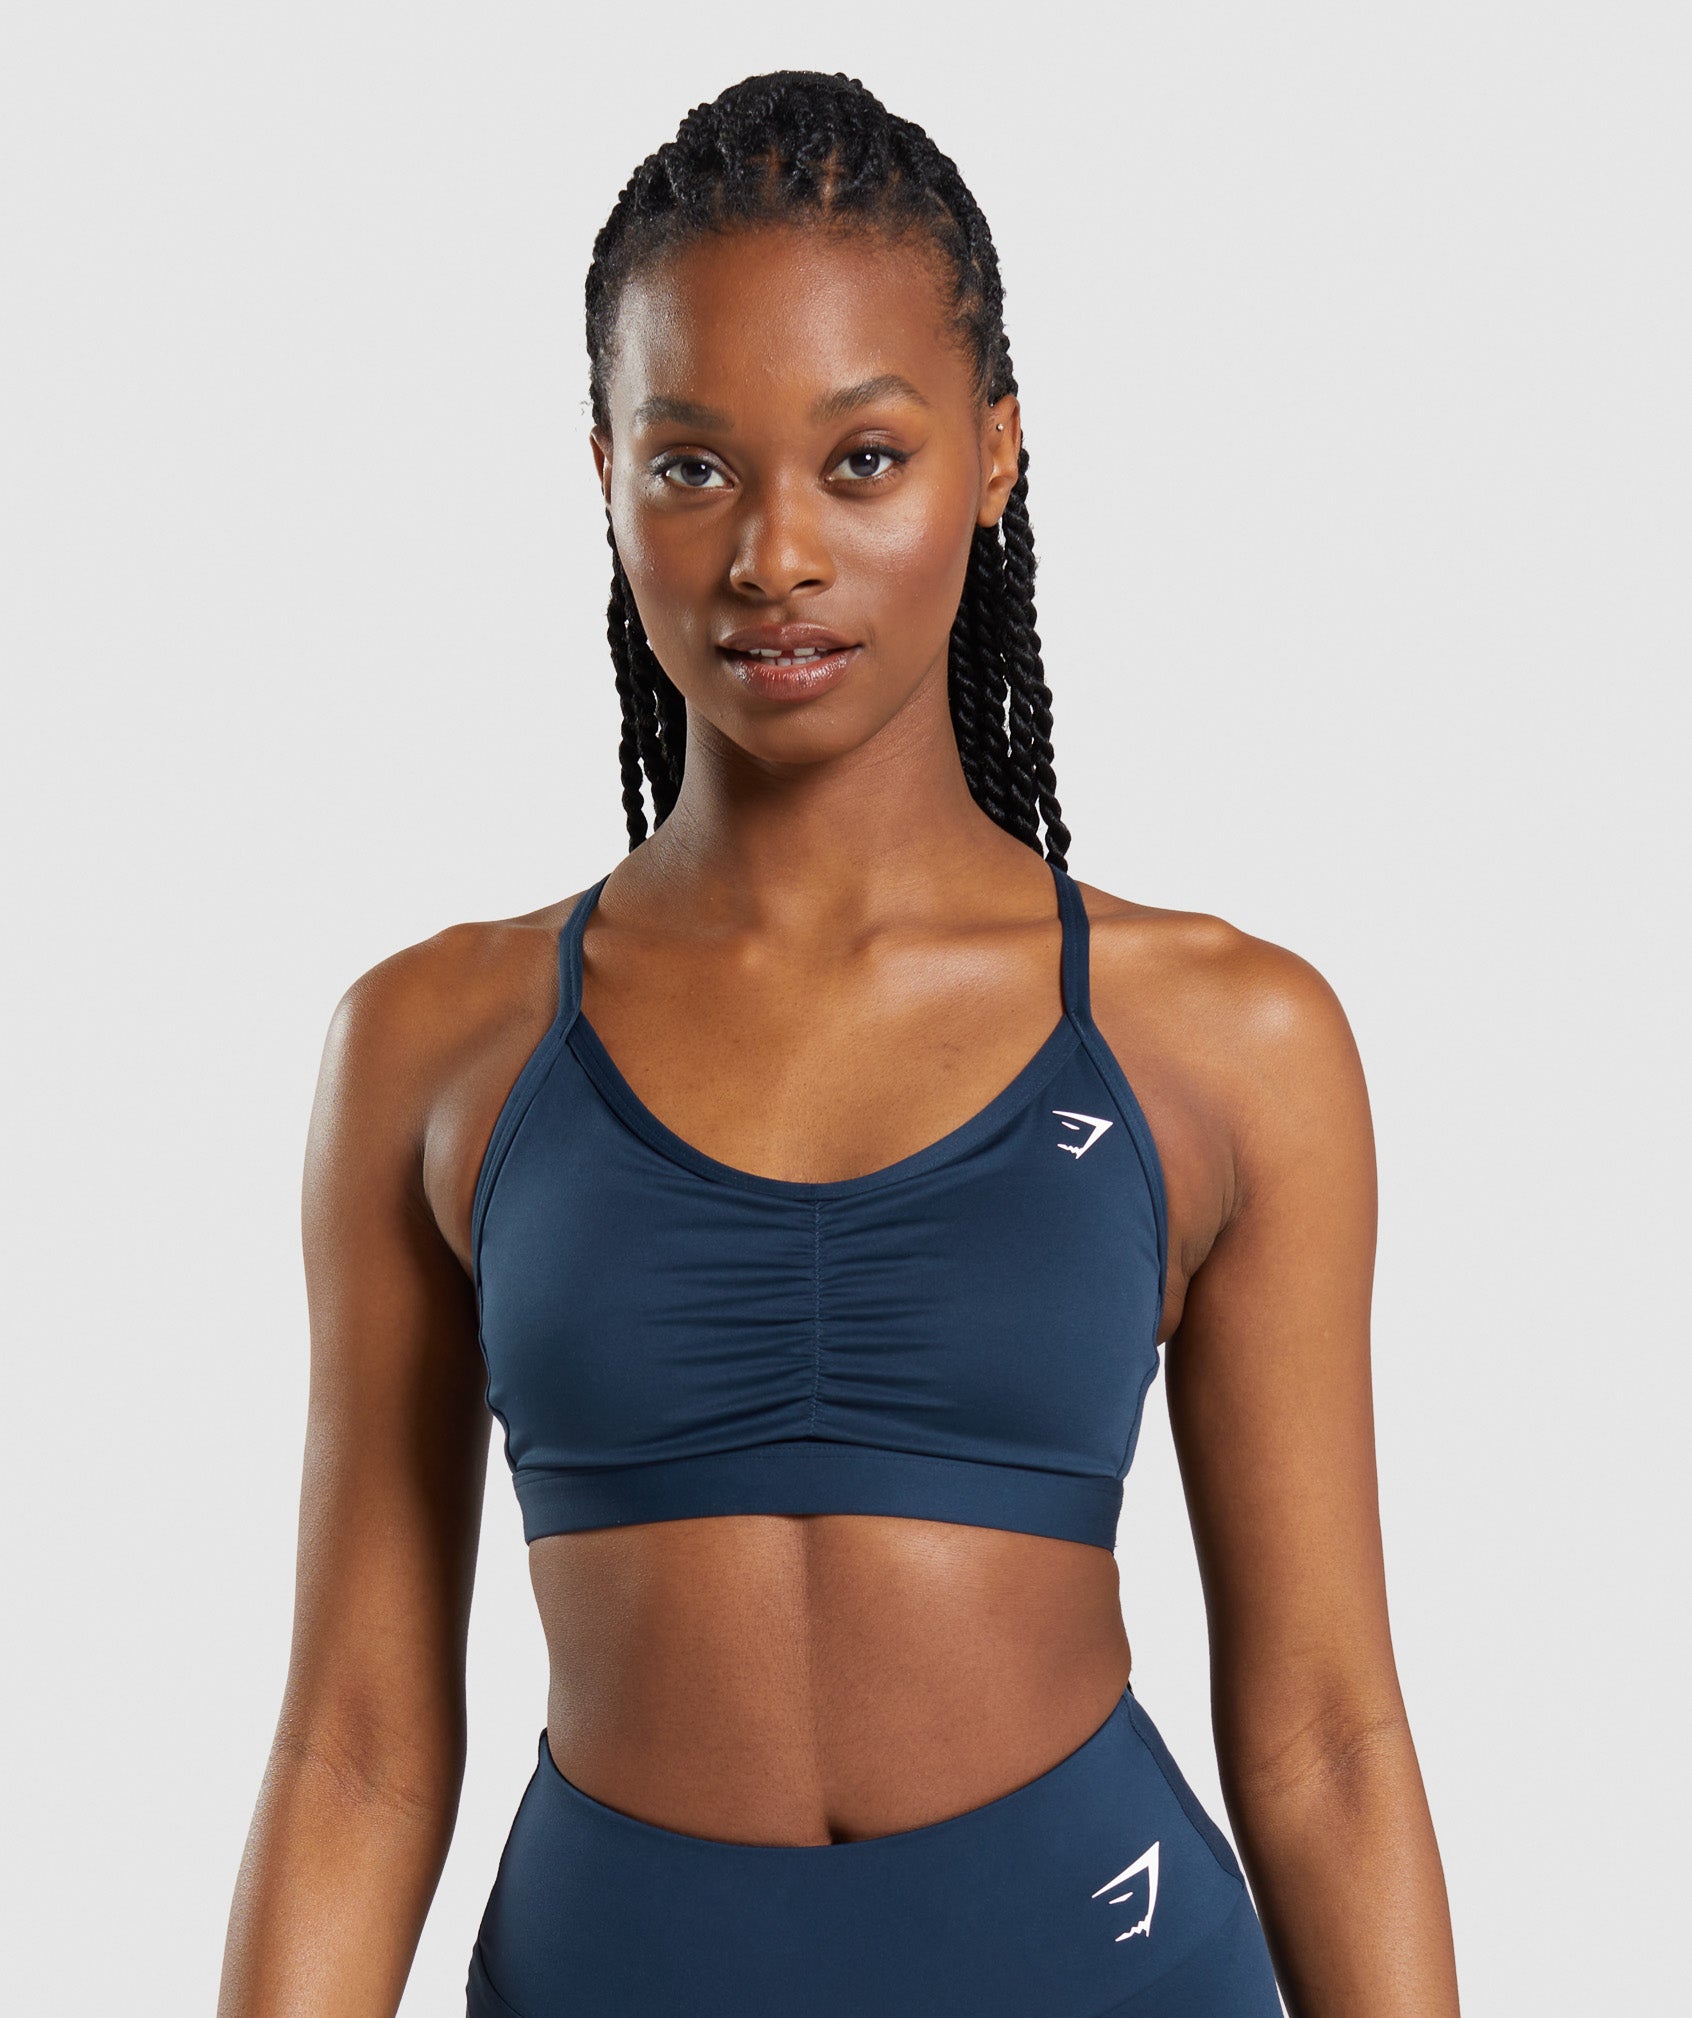 Ruched Sports Bra in Navy is out of stock